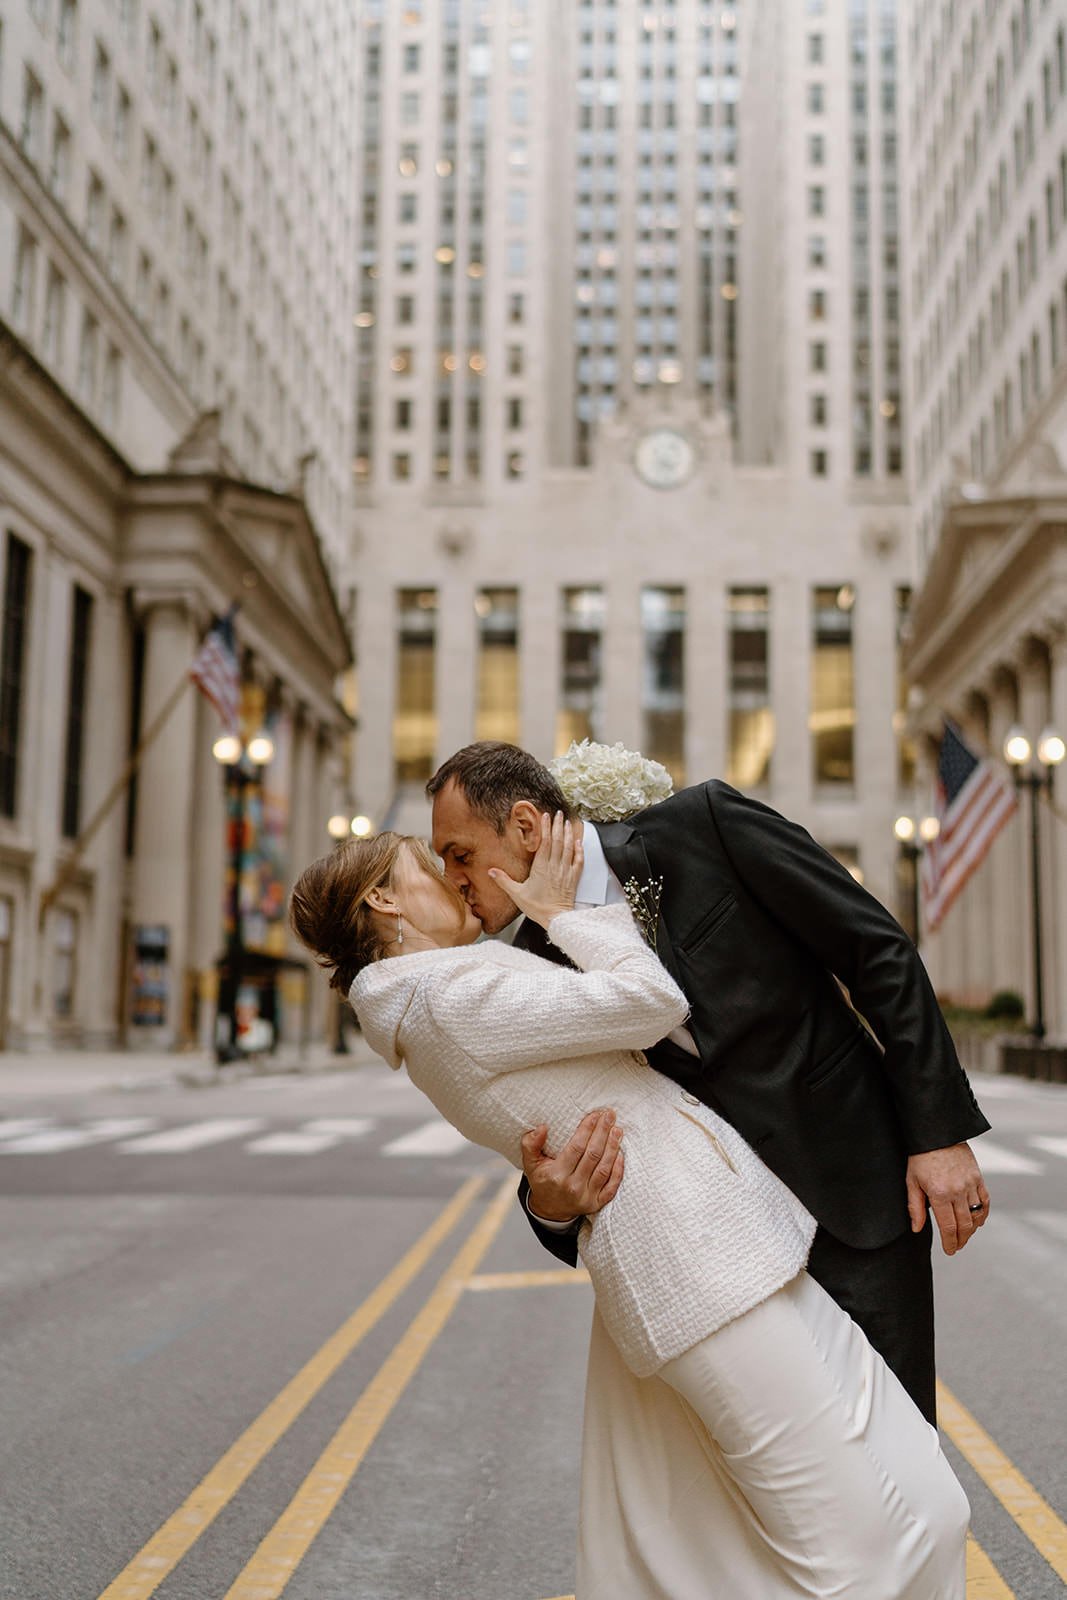 Wedding photos in front of the Chicago Board of Trade Building